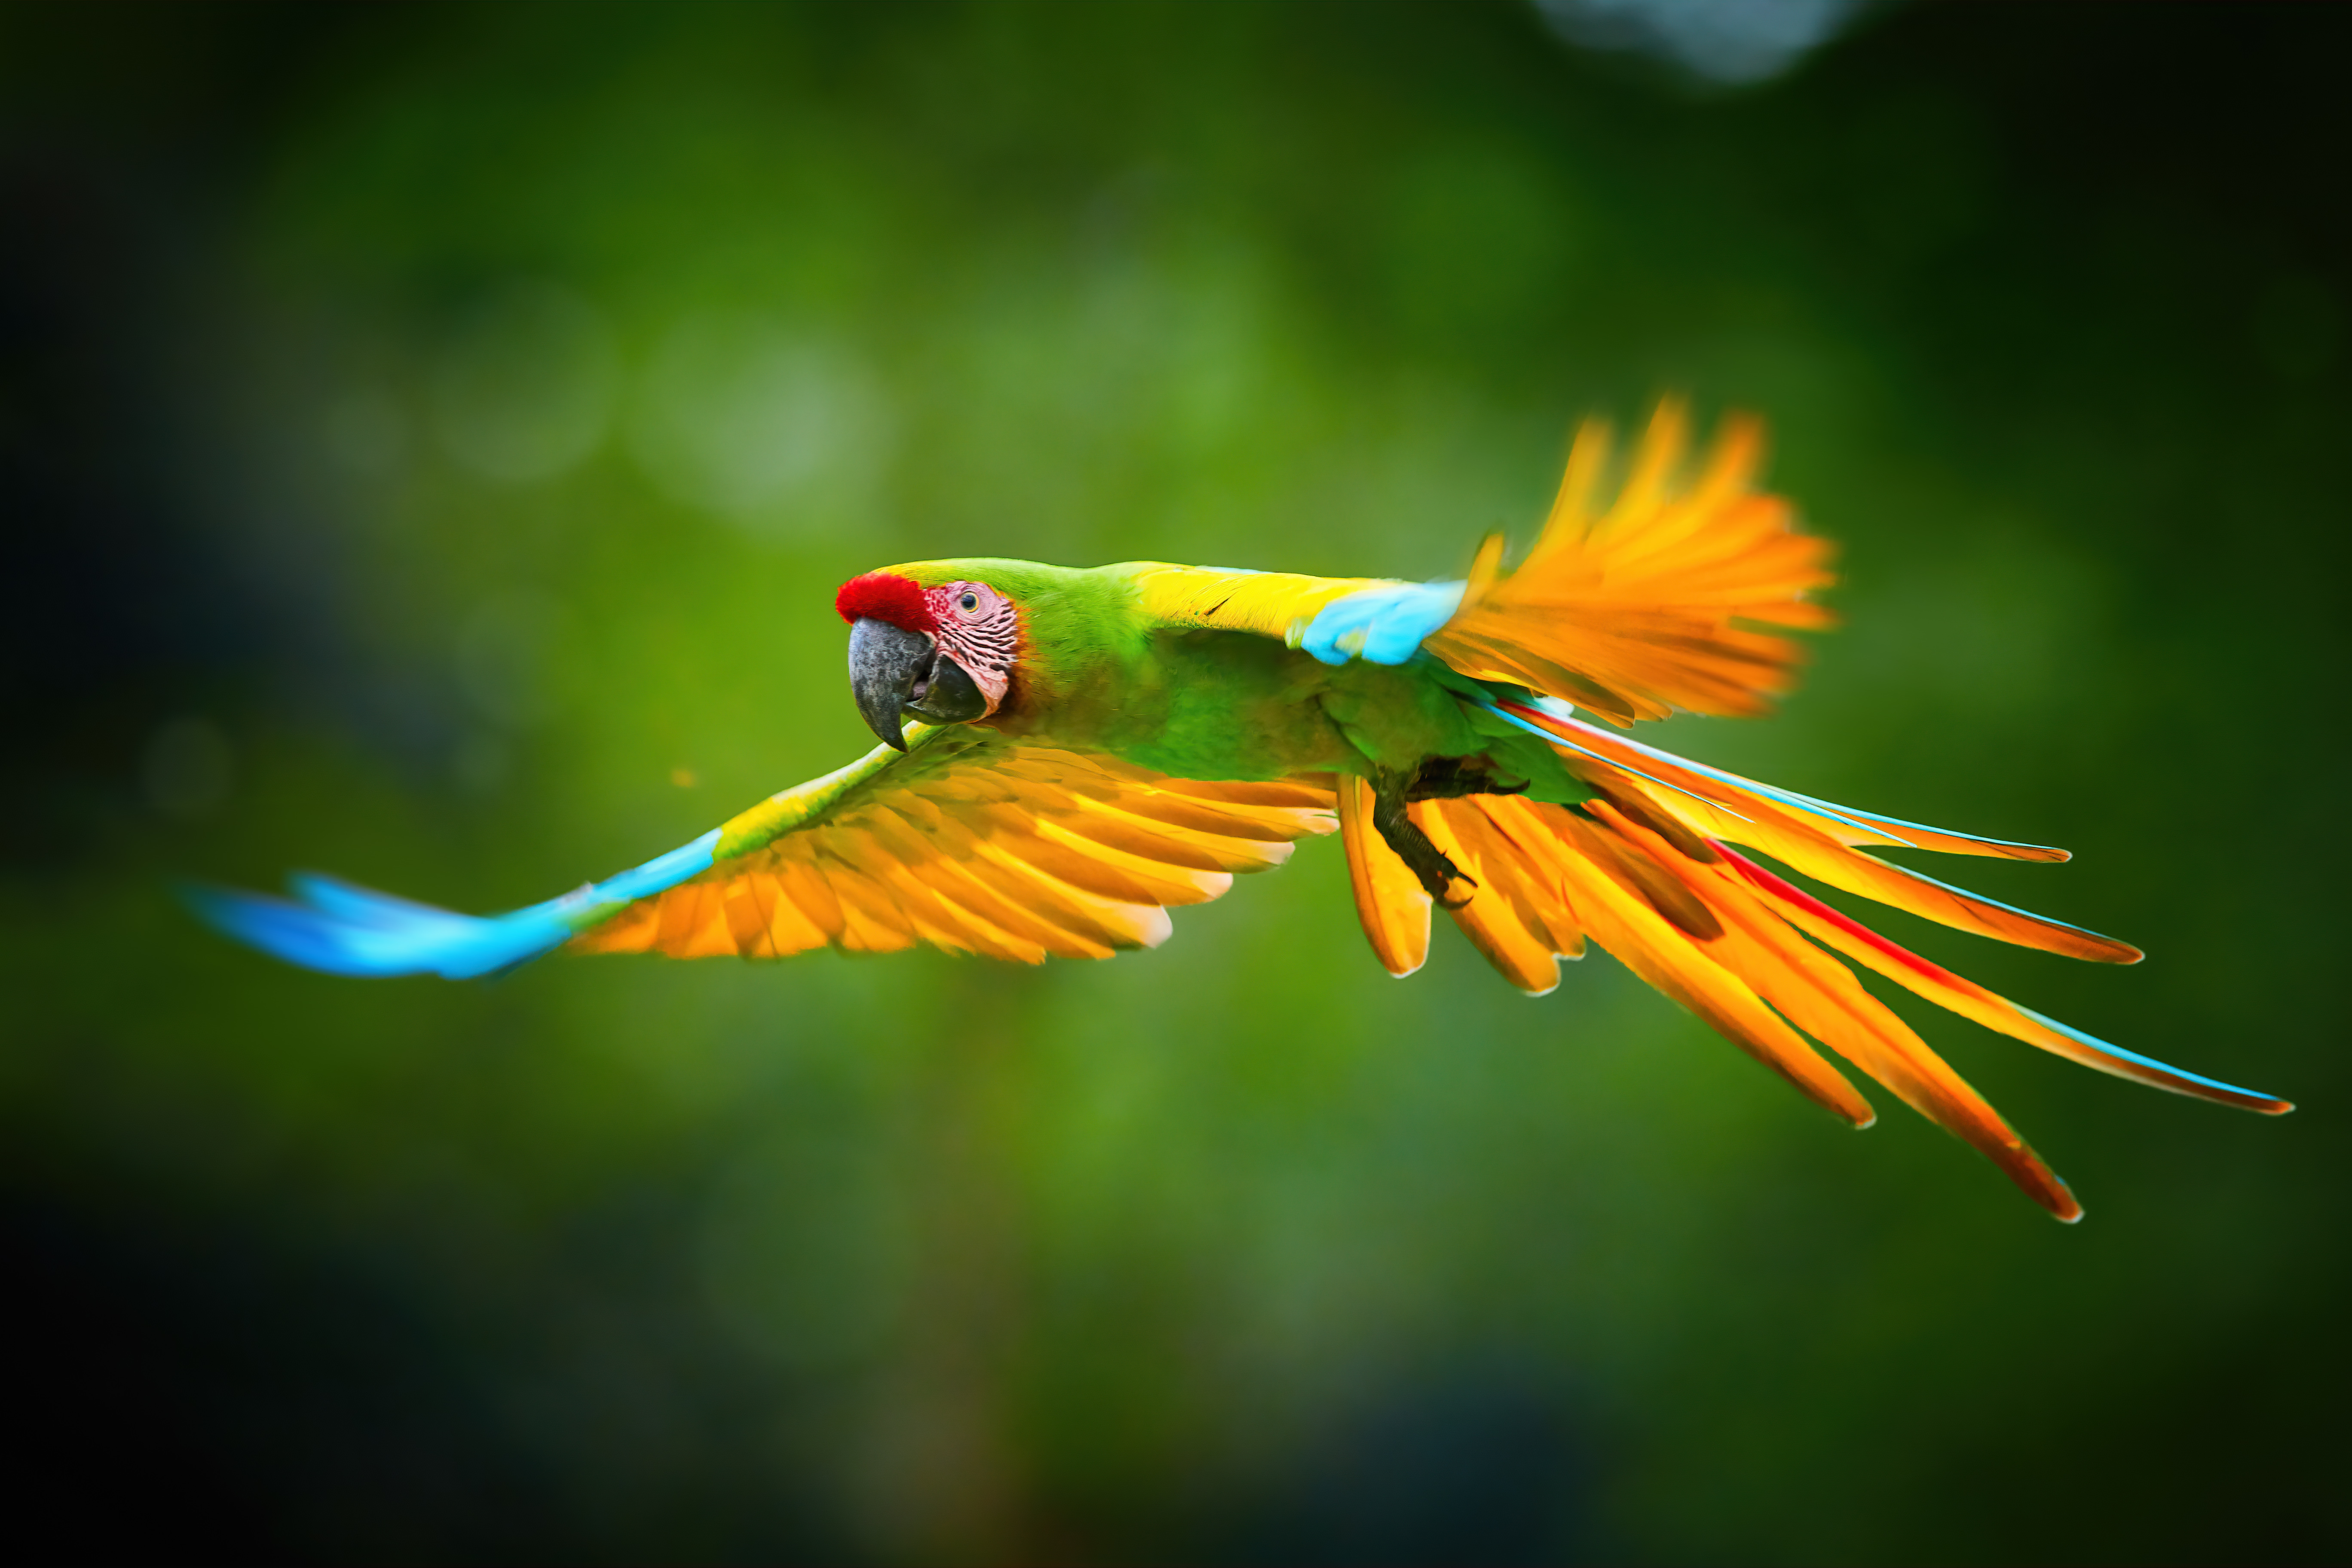 The Endangered Green Macaw